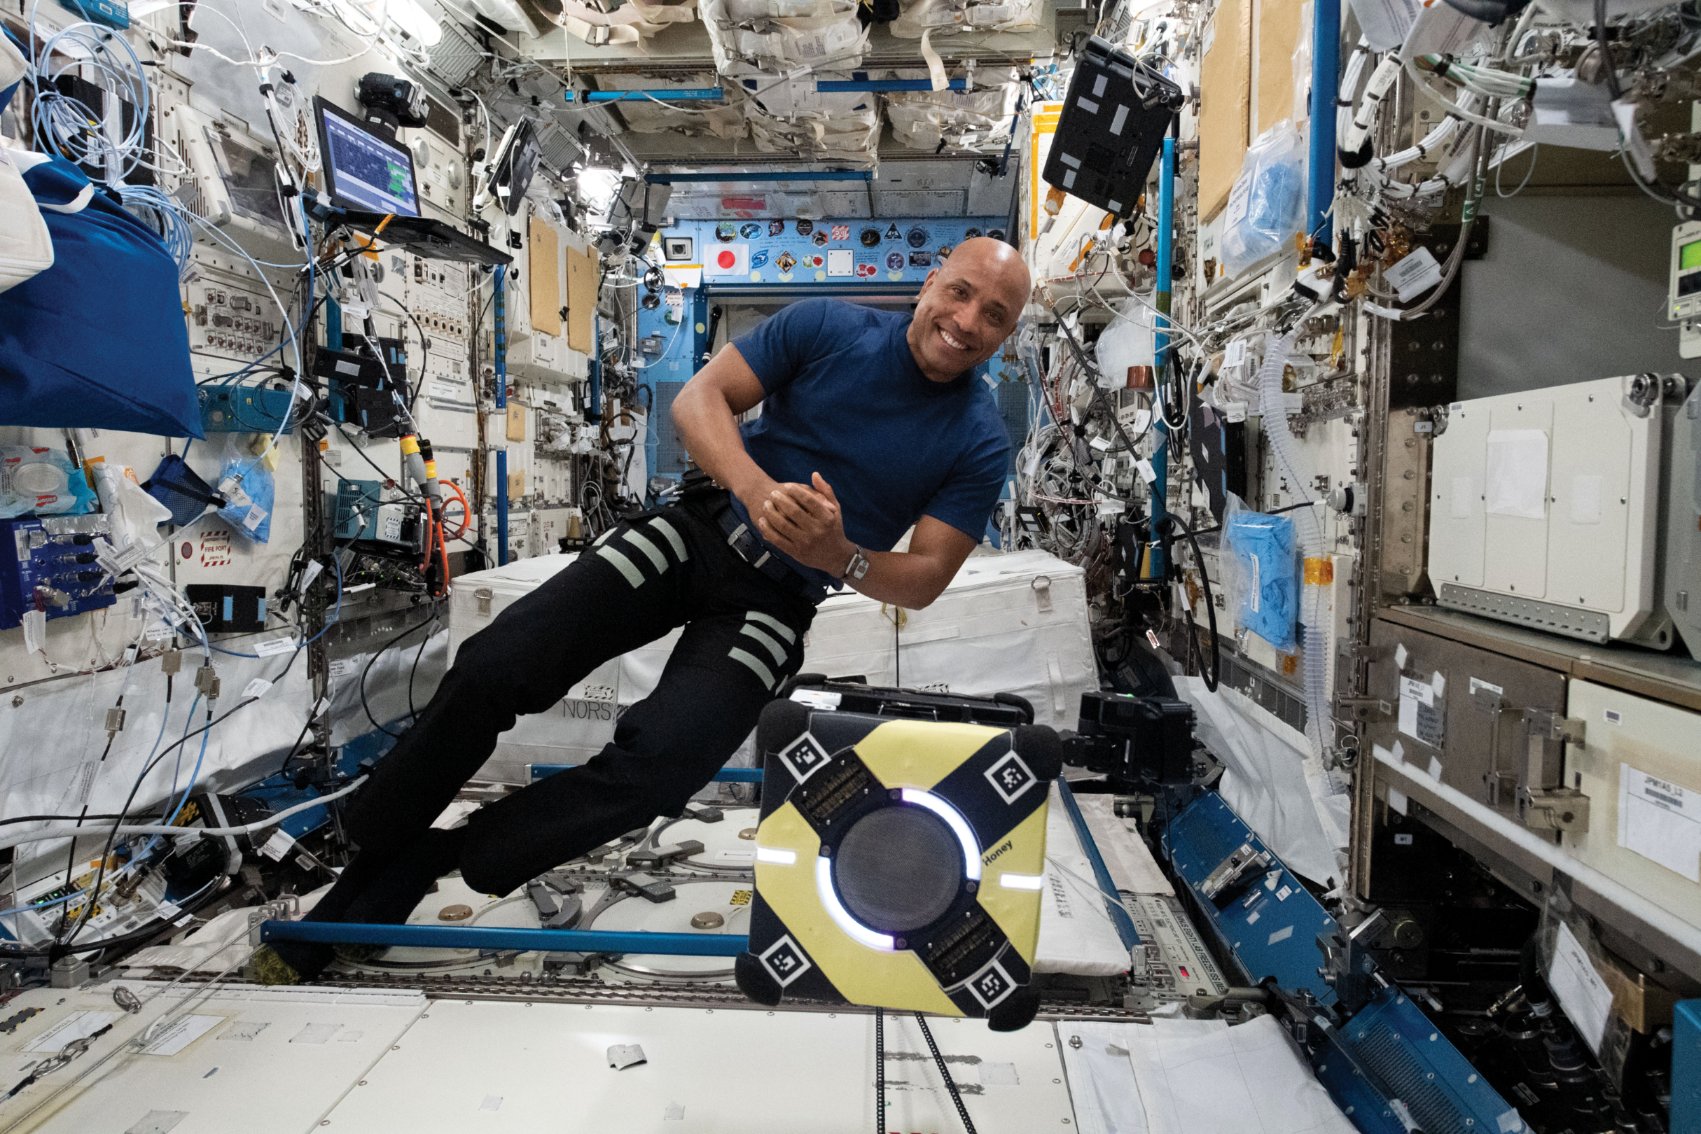 Watch NASA's Astrobee space-bots working independently on space station for the first time